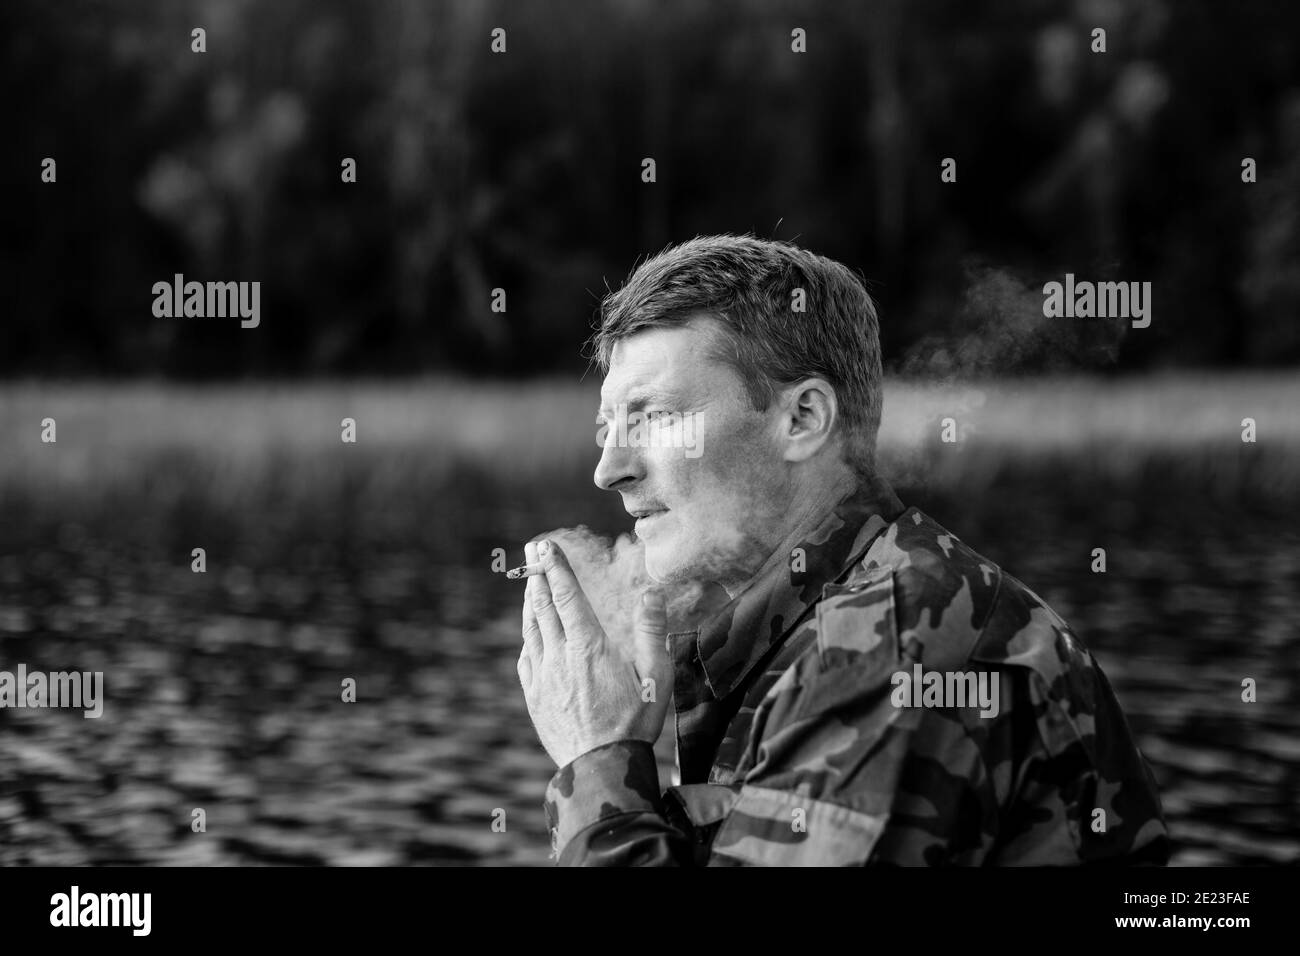 Fisherman in camouflage smoking a cigarette on a rubber boat in the lake. Black and white photo. Stock Photo